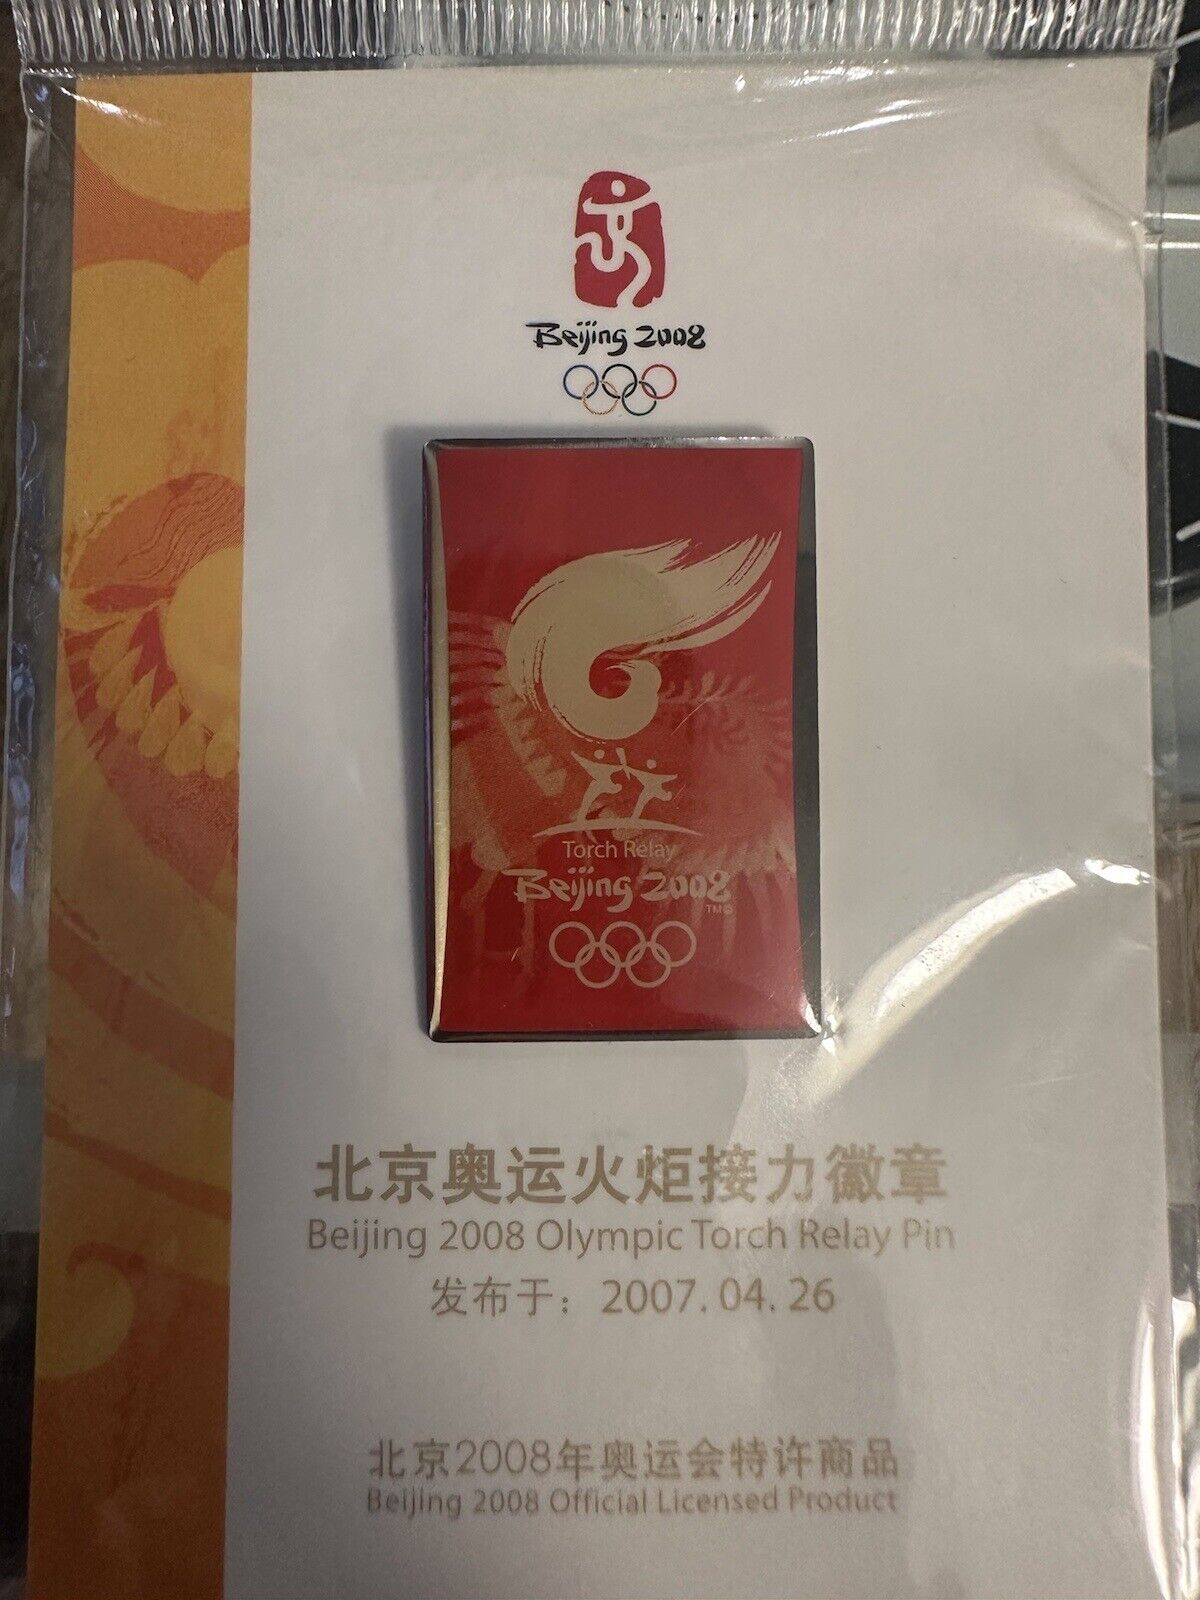 Beijing 2008 Olympic Torch Relay Running Pin (Official — Brand New)